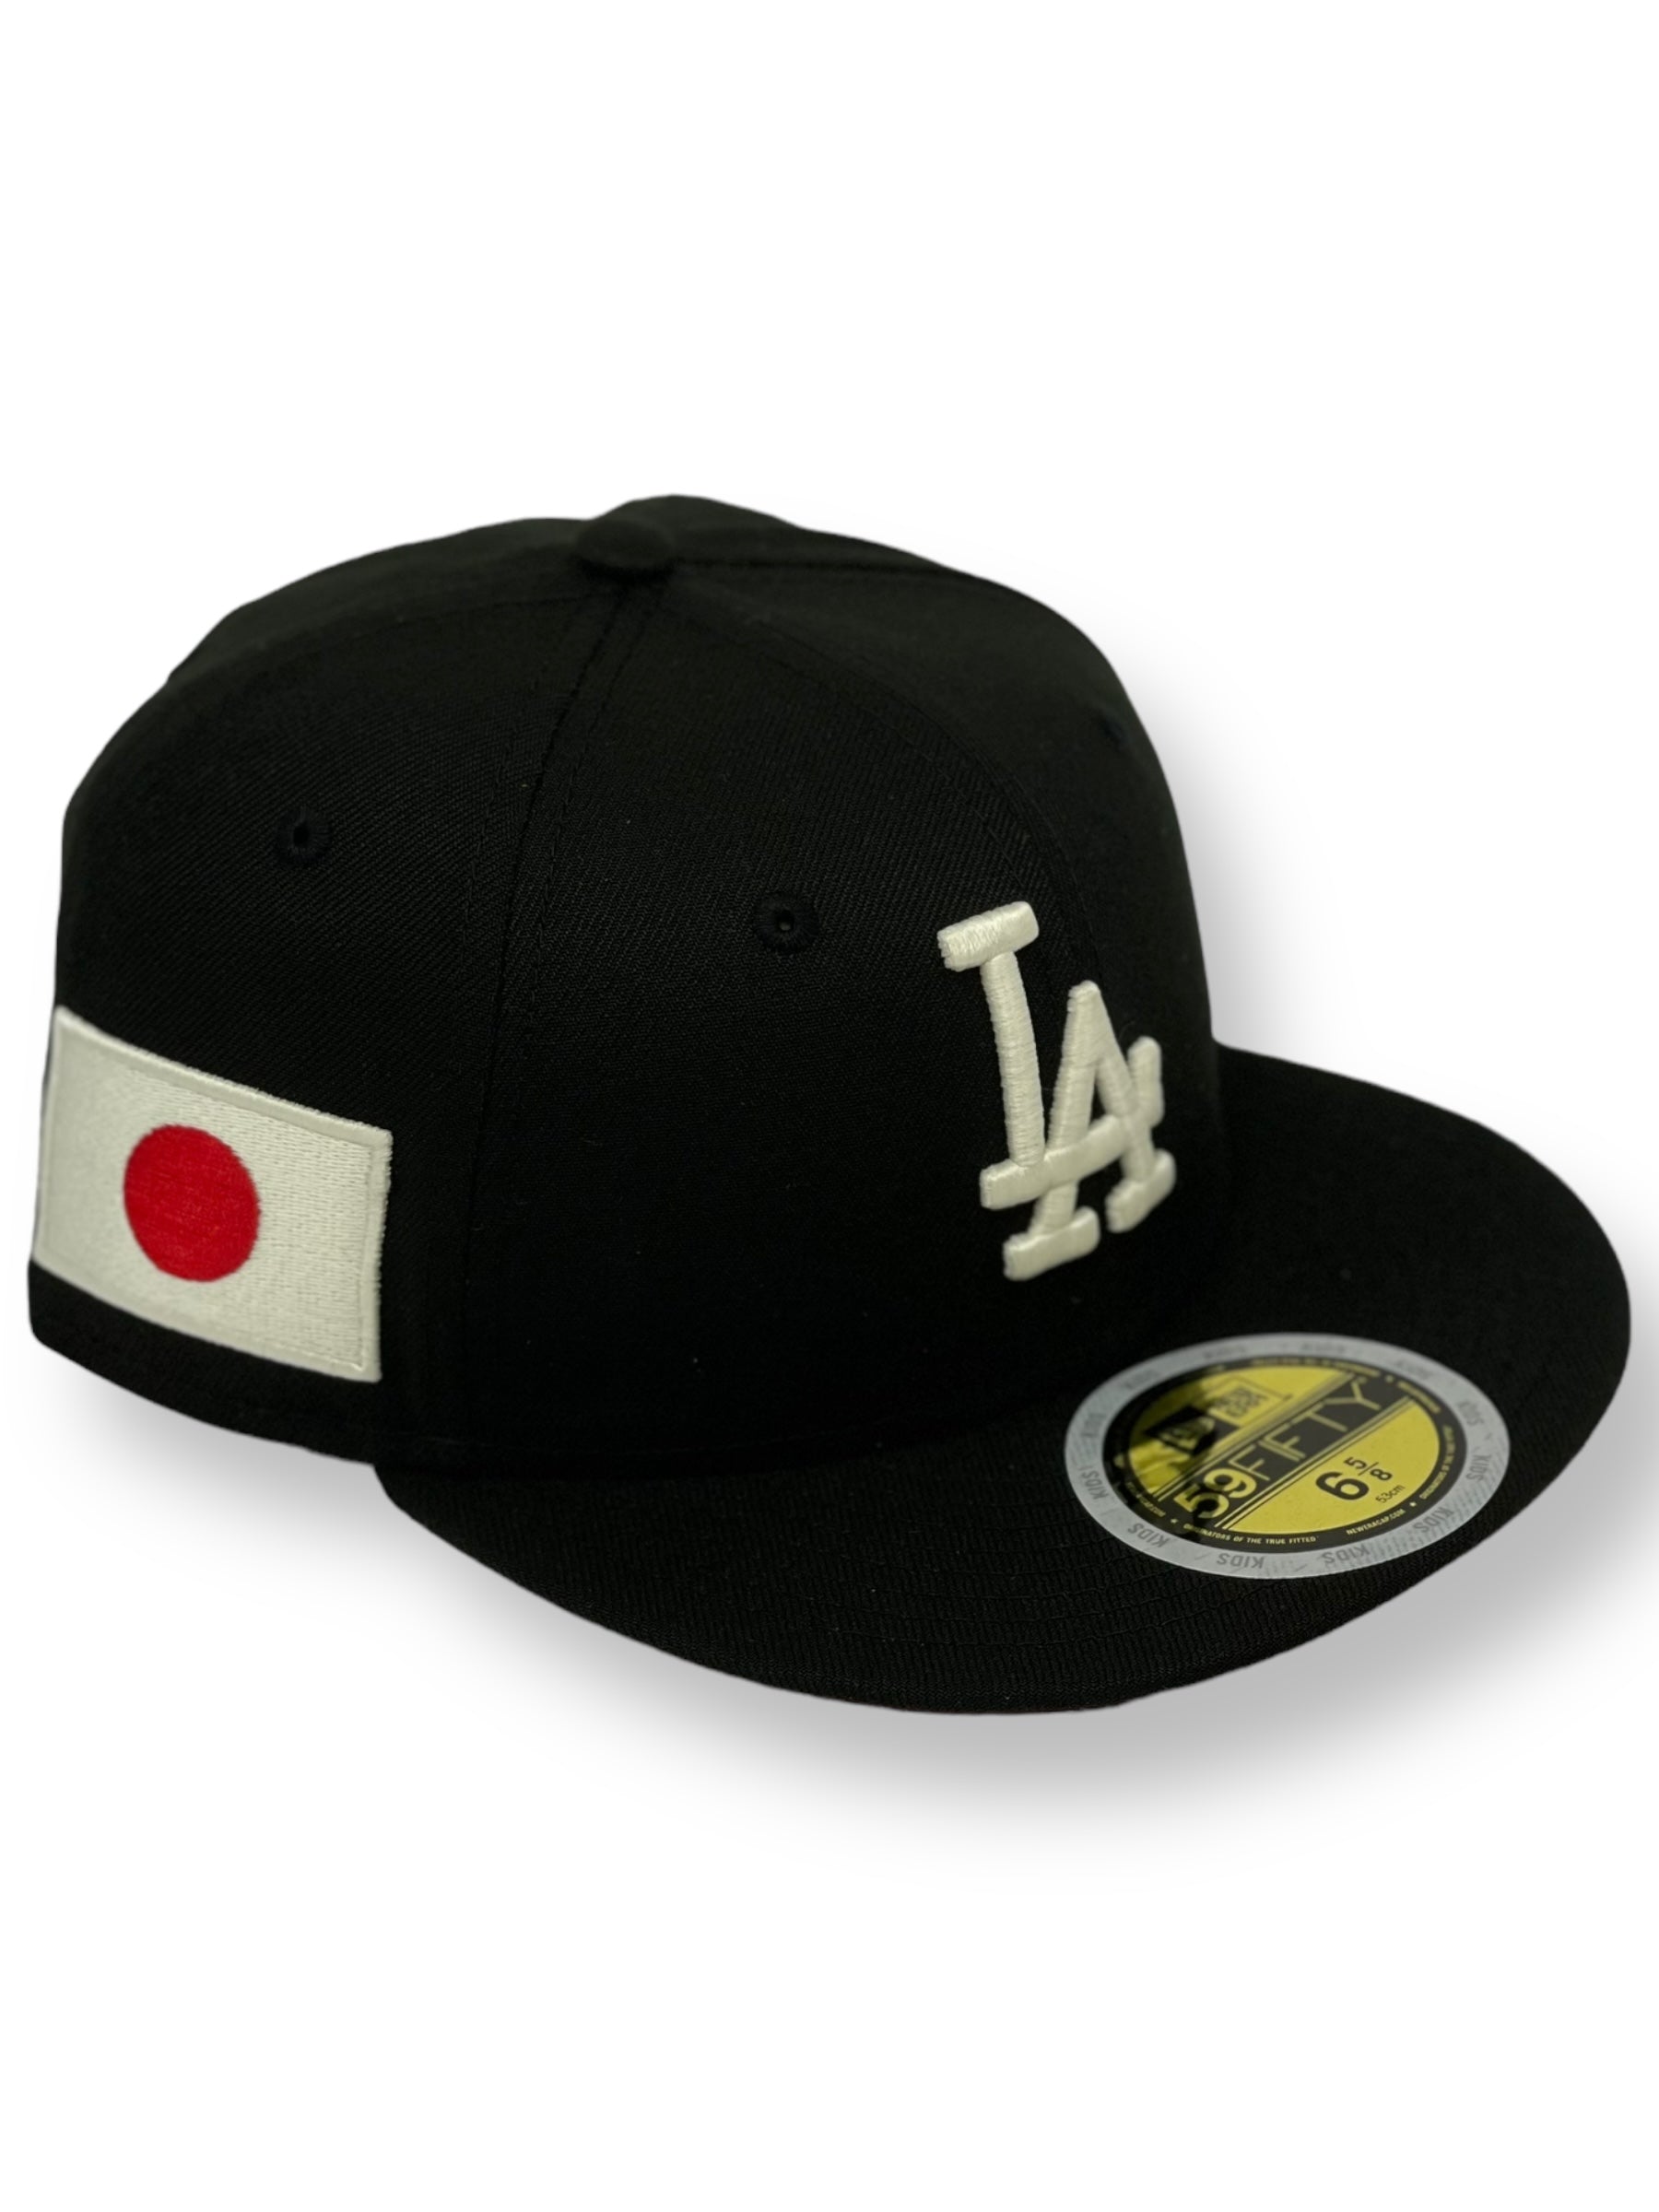 "KIDS" LOS ANGELES DODGERS "JAPAN FLAG" NEW ERA 59FIFTY FITTED